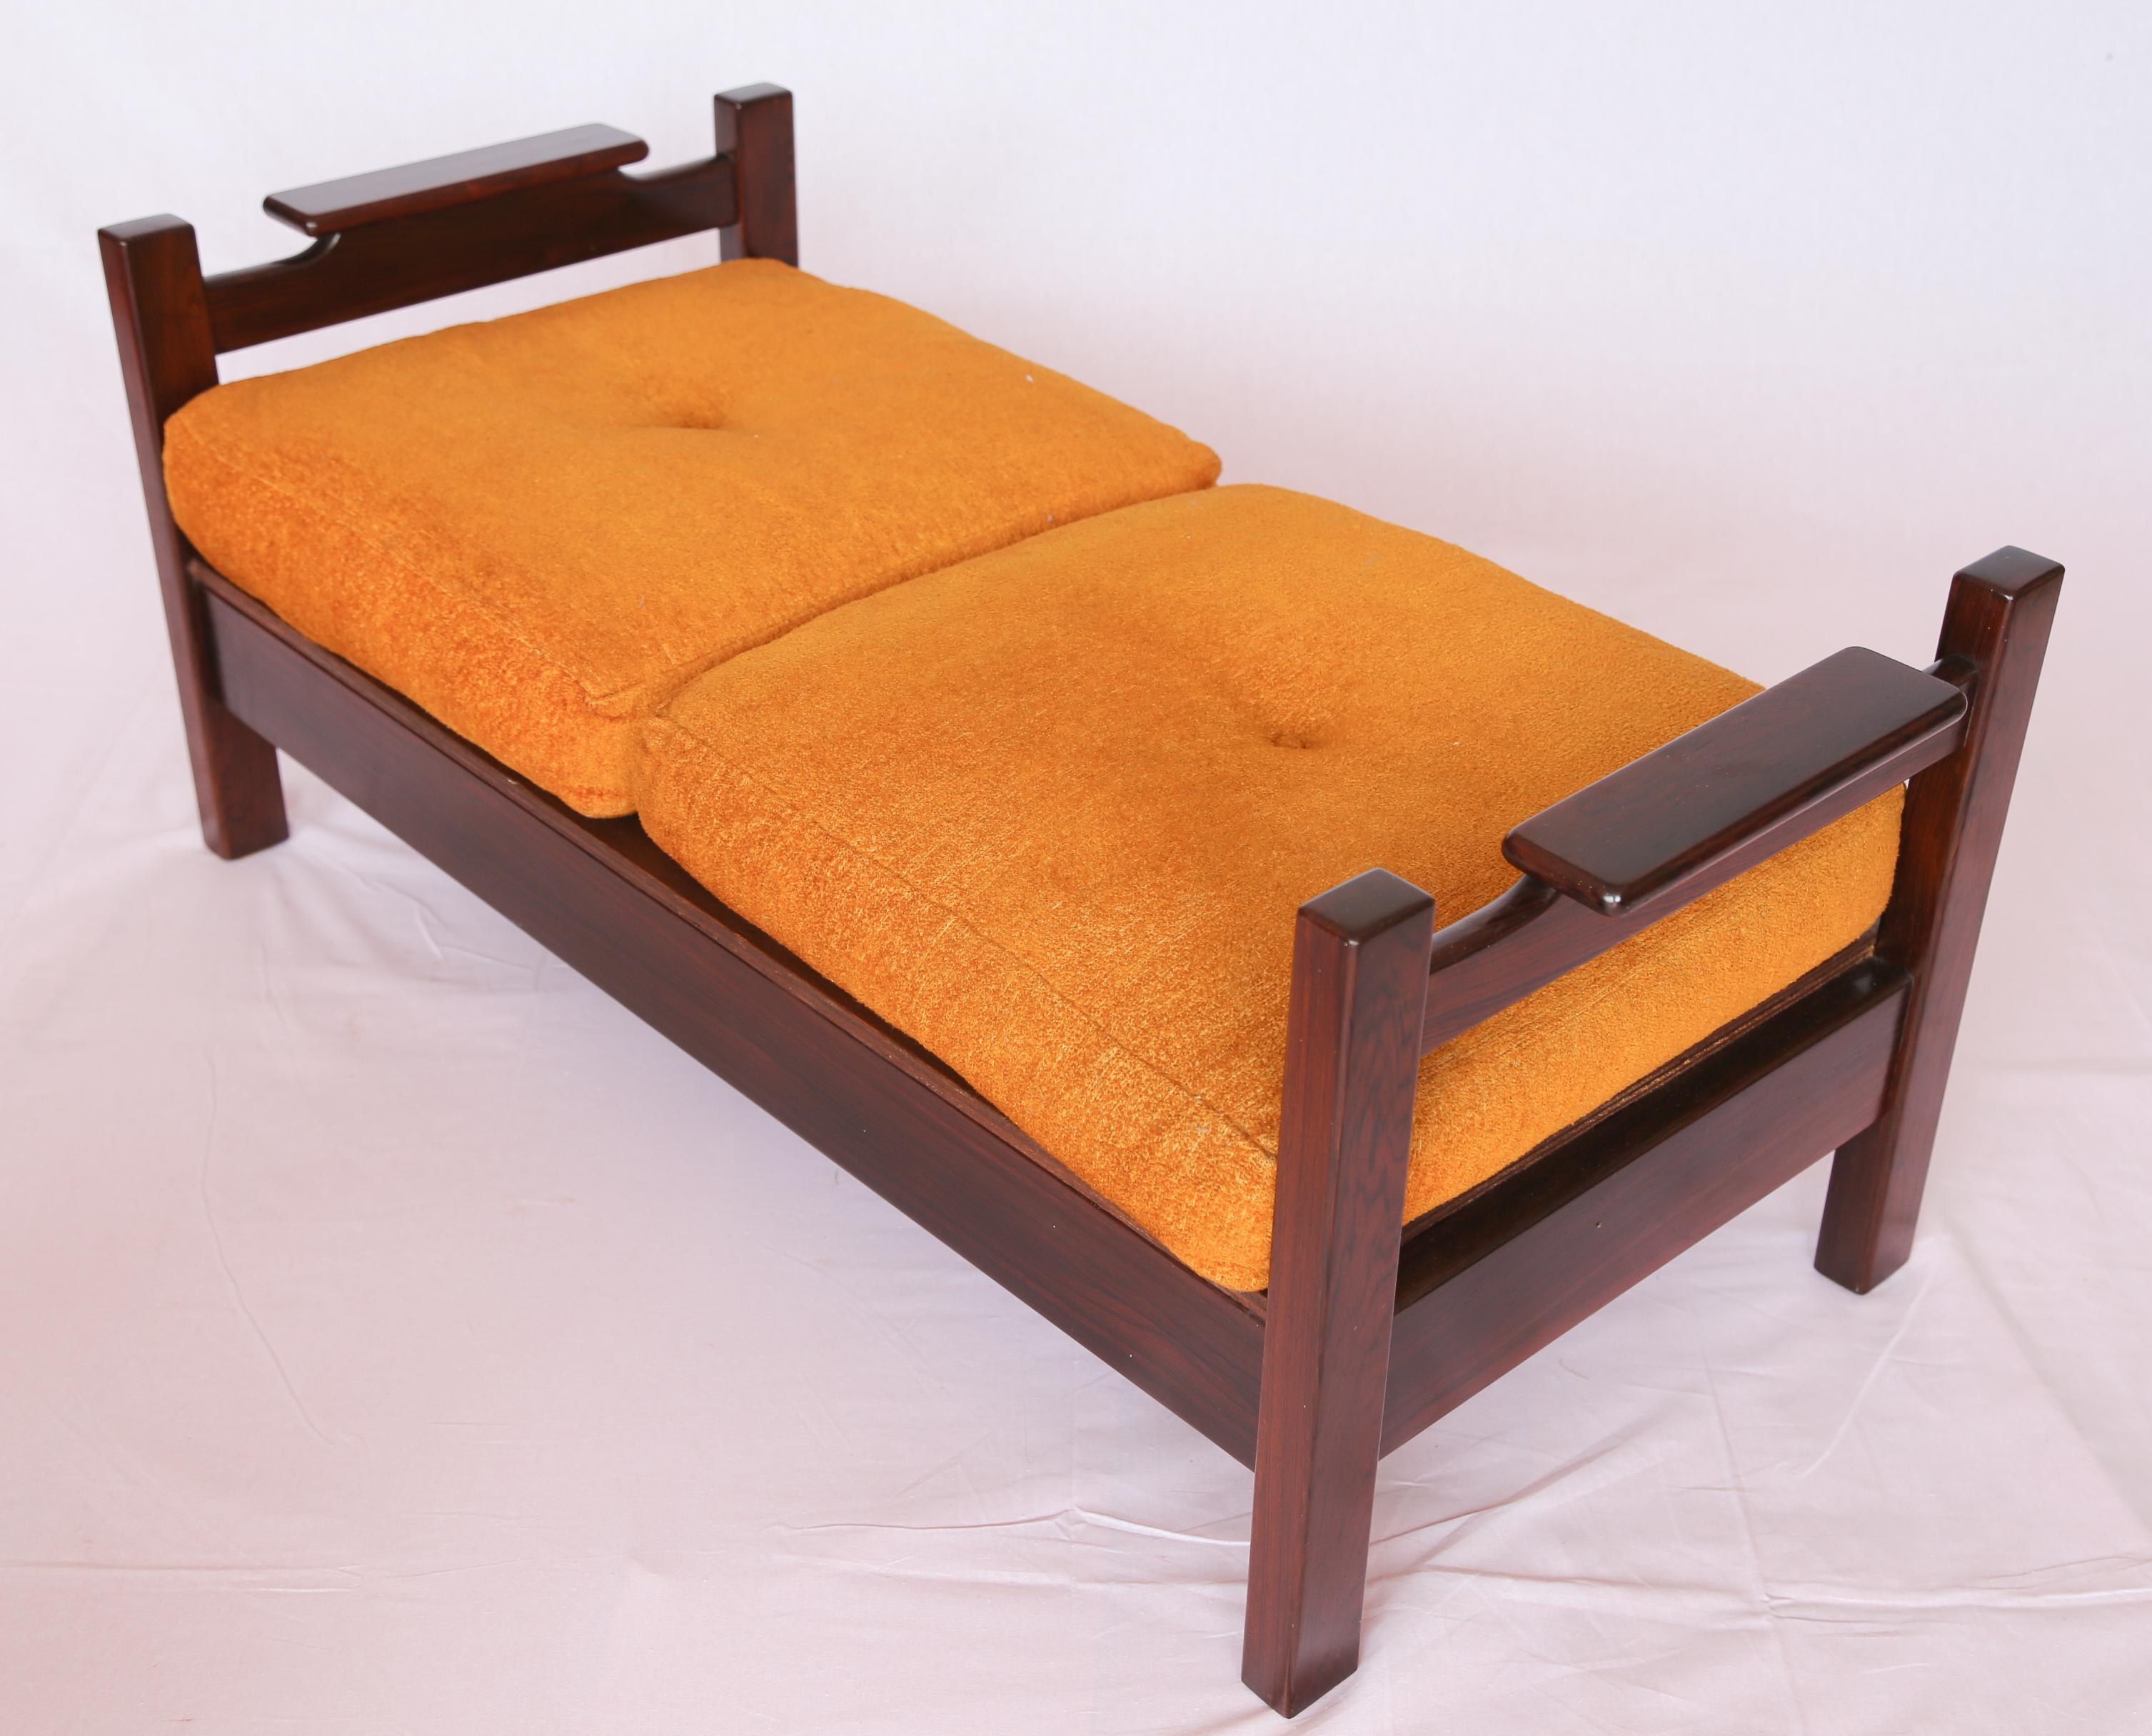 Available immediately, this Brazilian Modern Bench in Hardwood & Orange Cushions by Fatima Moveis is stunning!

This midcentury modern bench is made of Brazilian Rosewood, as known as Jacaranda, and has delicate woodwork to the sides. The seat has